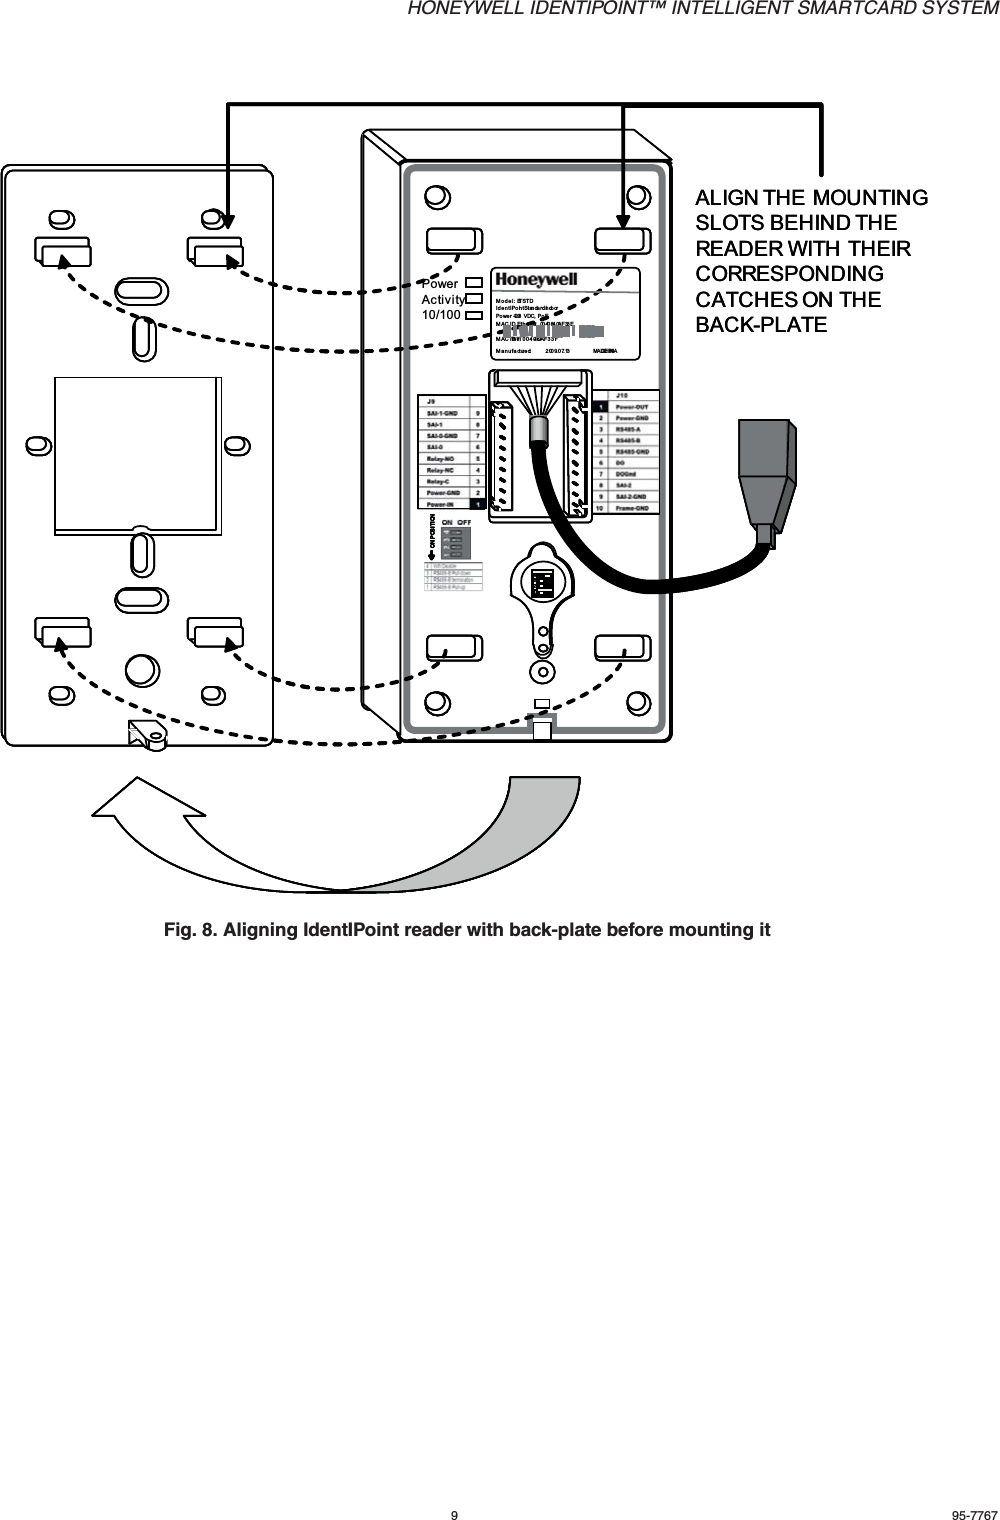 HONEYWELL IDENTIPOINT™ INTELLIGENT SMARTCARD SYSTEM995-7767Fig. 8. Aligning IdentIPoint reader with back-plate before mounting itALIGN THE  MOUNTING SLOTS BEHIND THE READER WITH THEIR CORRESPONDING CATCHES ON THE BACK-PLATE10/100ActivityPowerModel: BTSTDIdentIPoint Stan da rd IndoorPower 1 0-28  VDC, PoEM AC ID Eth ernet   00 40 84 0A F 33 EMAC ID Wi-fi 00408-I OA F 3 3 FManufactured:             2009.07.13                    MA D E  IN CHINAON P OS I T I ONON P OS I T I ONON P OS I T I ONON P OS I T I ON12341234123412341234ALIGN THE  MOUNTING SLOTS BEHIND THE READER WITH THEIR CORRESPONDING CATCHES ON THE BACK-PLATE10/100ActivityPowerModel: BTSTDIdentIPoint Stan da rd IndoorPower 1 0-28  VDC, PoEM AC ID Eth ernet   00 40 84 0A F 33 EMAC ID Wi-fi 00408-I OA F 3 3 FManufactured:             2009.07.13                    MA D E  IN CHINAON P OS I T I ONON P OS I T I ONON P OS I T I ONON P OS I T I ON12341234123412341234